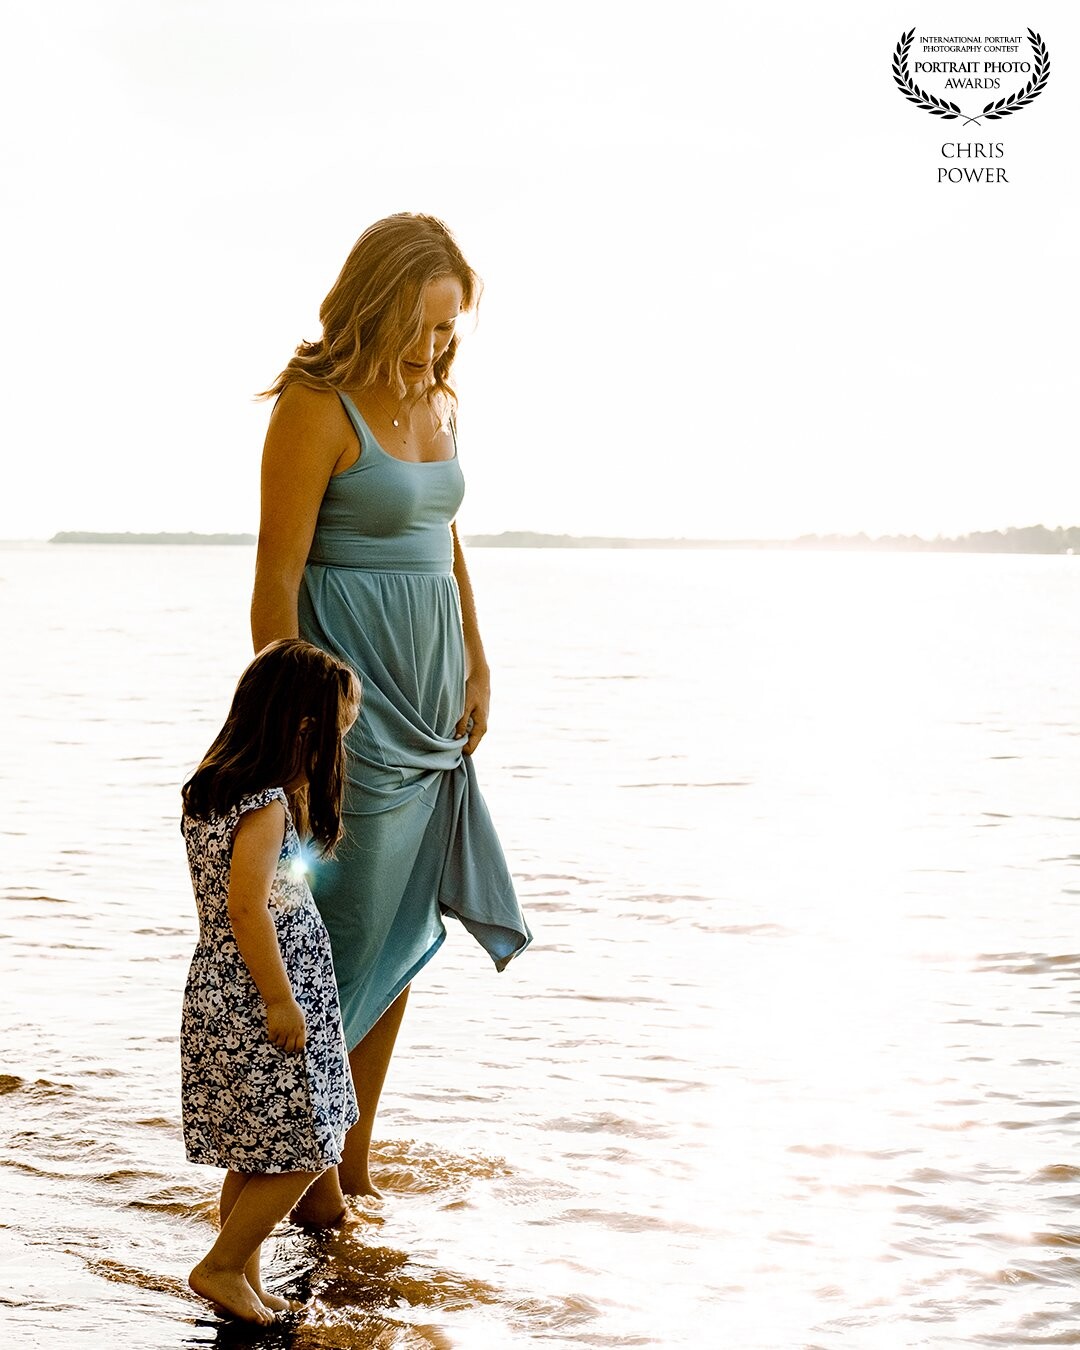 A mother and daughter in the moment walking at the waters edge. The start of a lifelong journey together, supporting each other and challenging each other to grow.